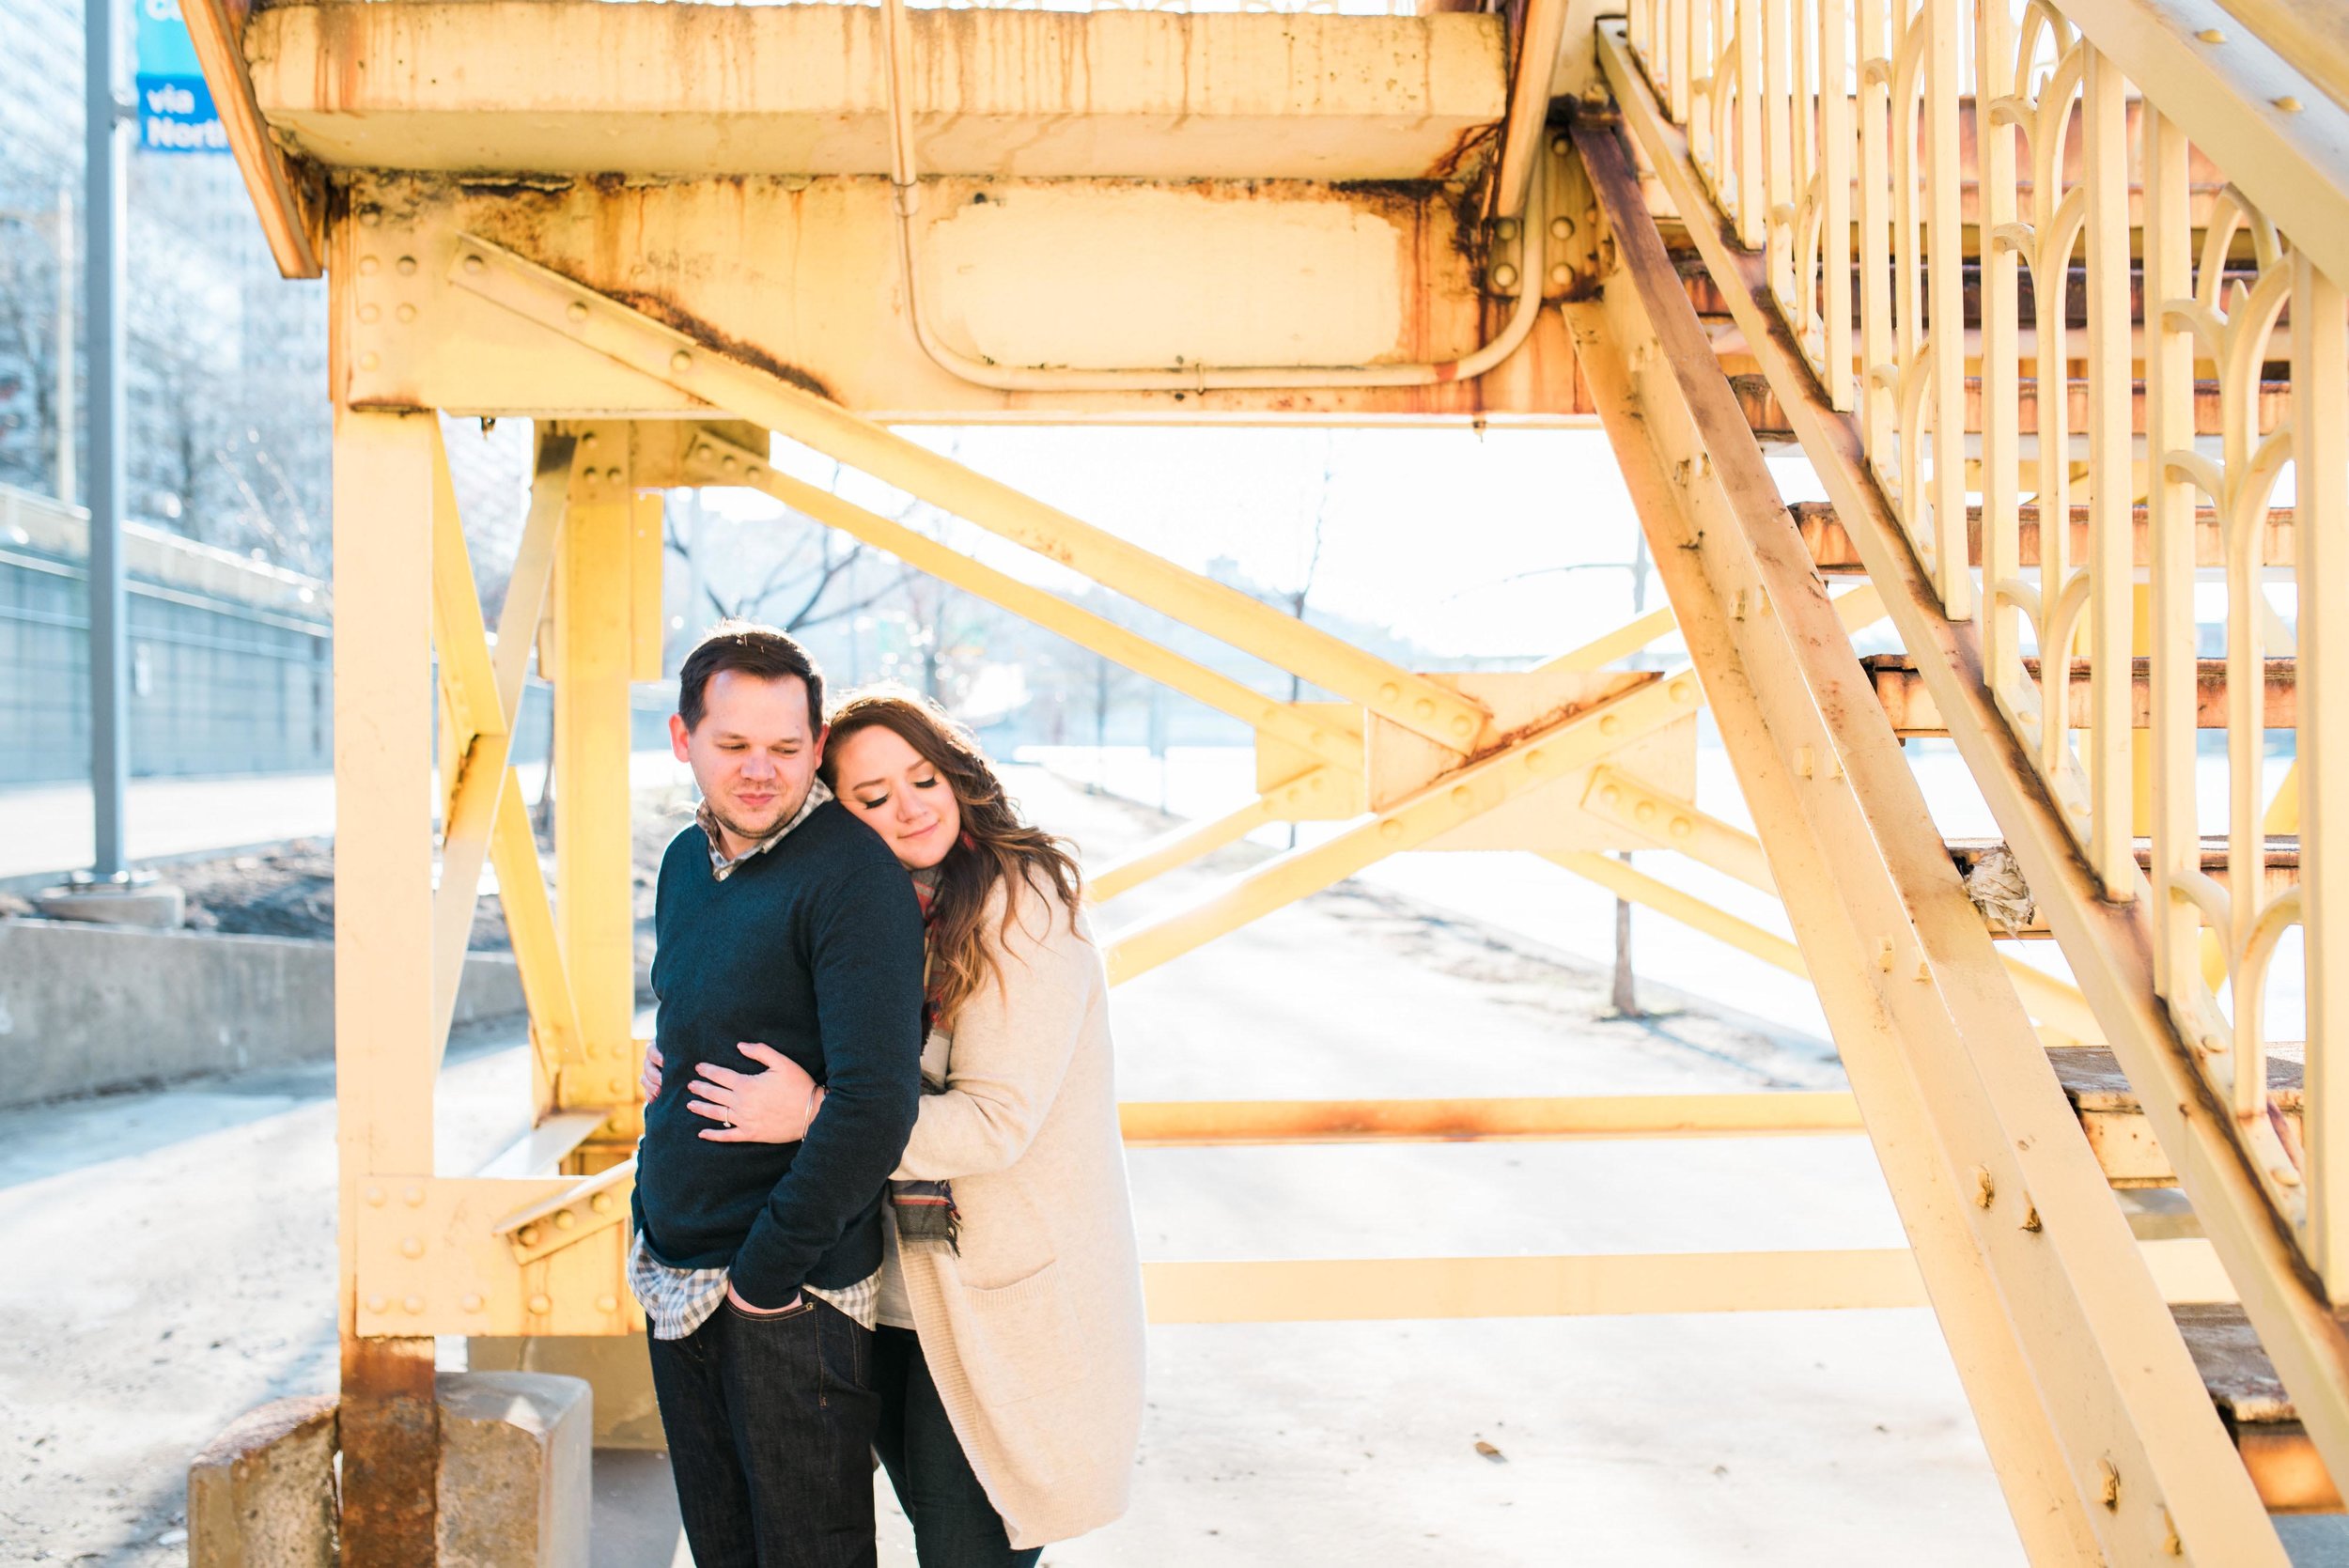 pittsburgh wedding photographers, a downtown engagement